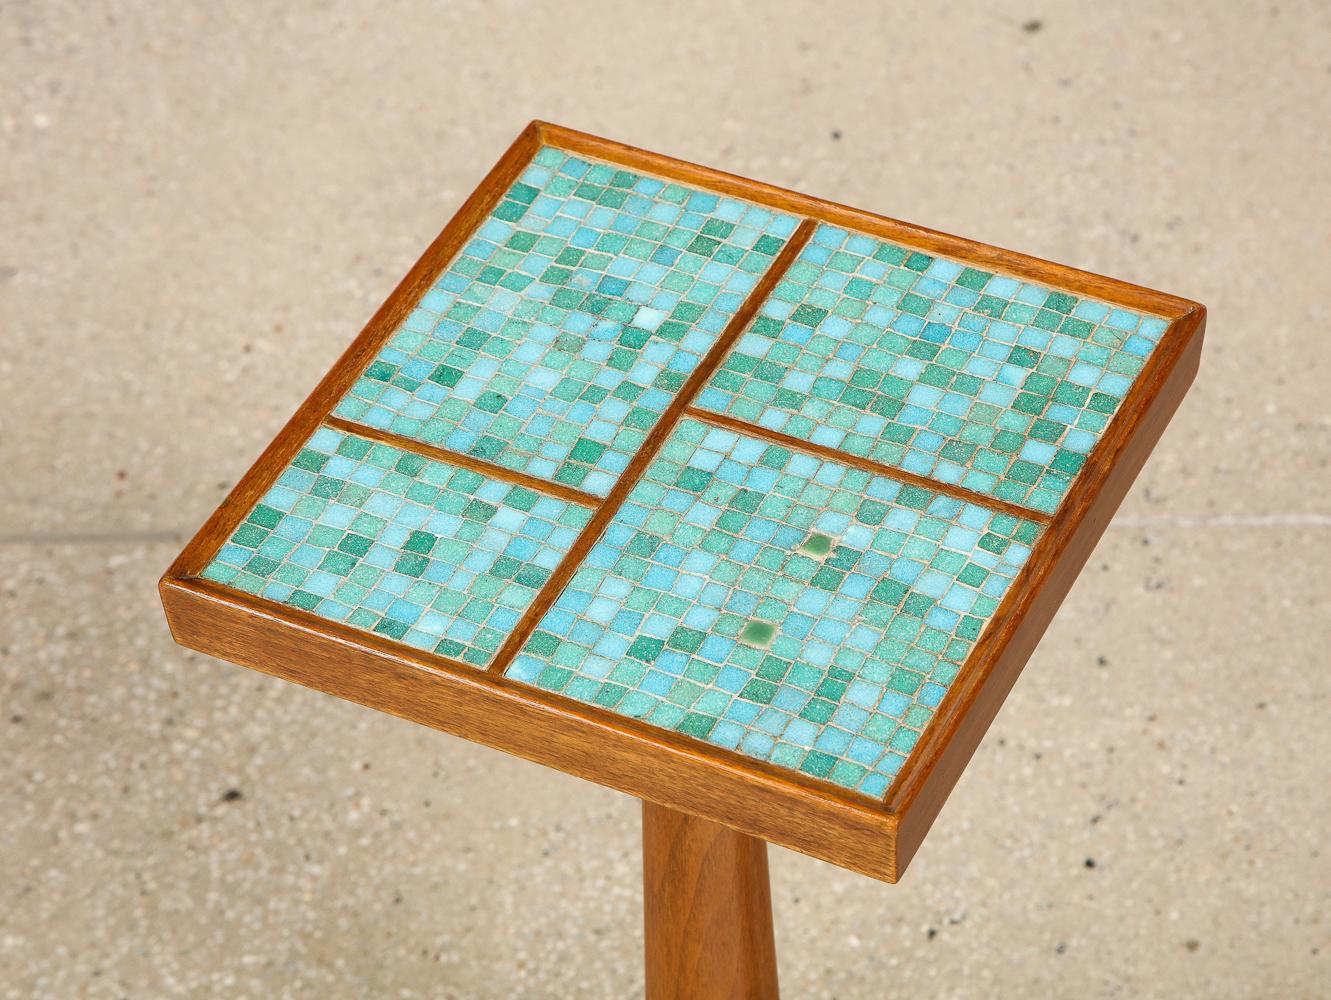 Mahogany, opaque glass tiles, brass. Green and turquoise Murano inset tile top, solid mahogany tripod base with brass feet. Makers label affixed underneath.